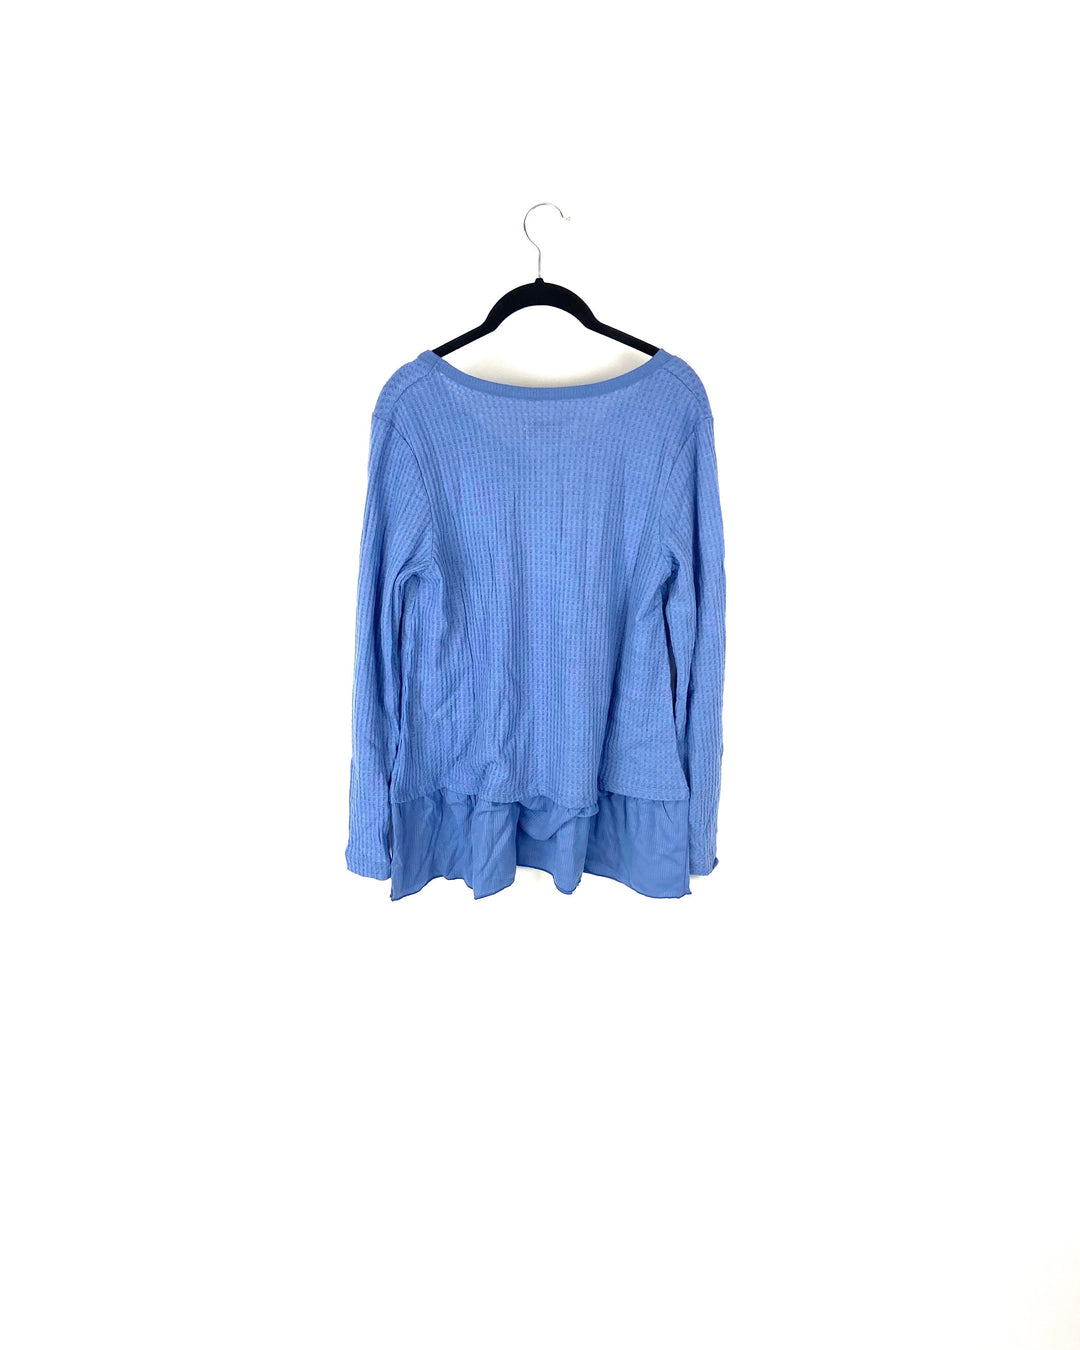 Blue Waffle Long Sleeved Top - Small